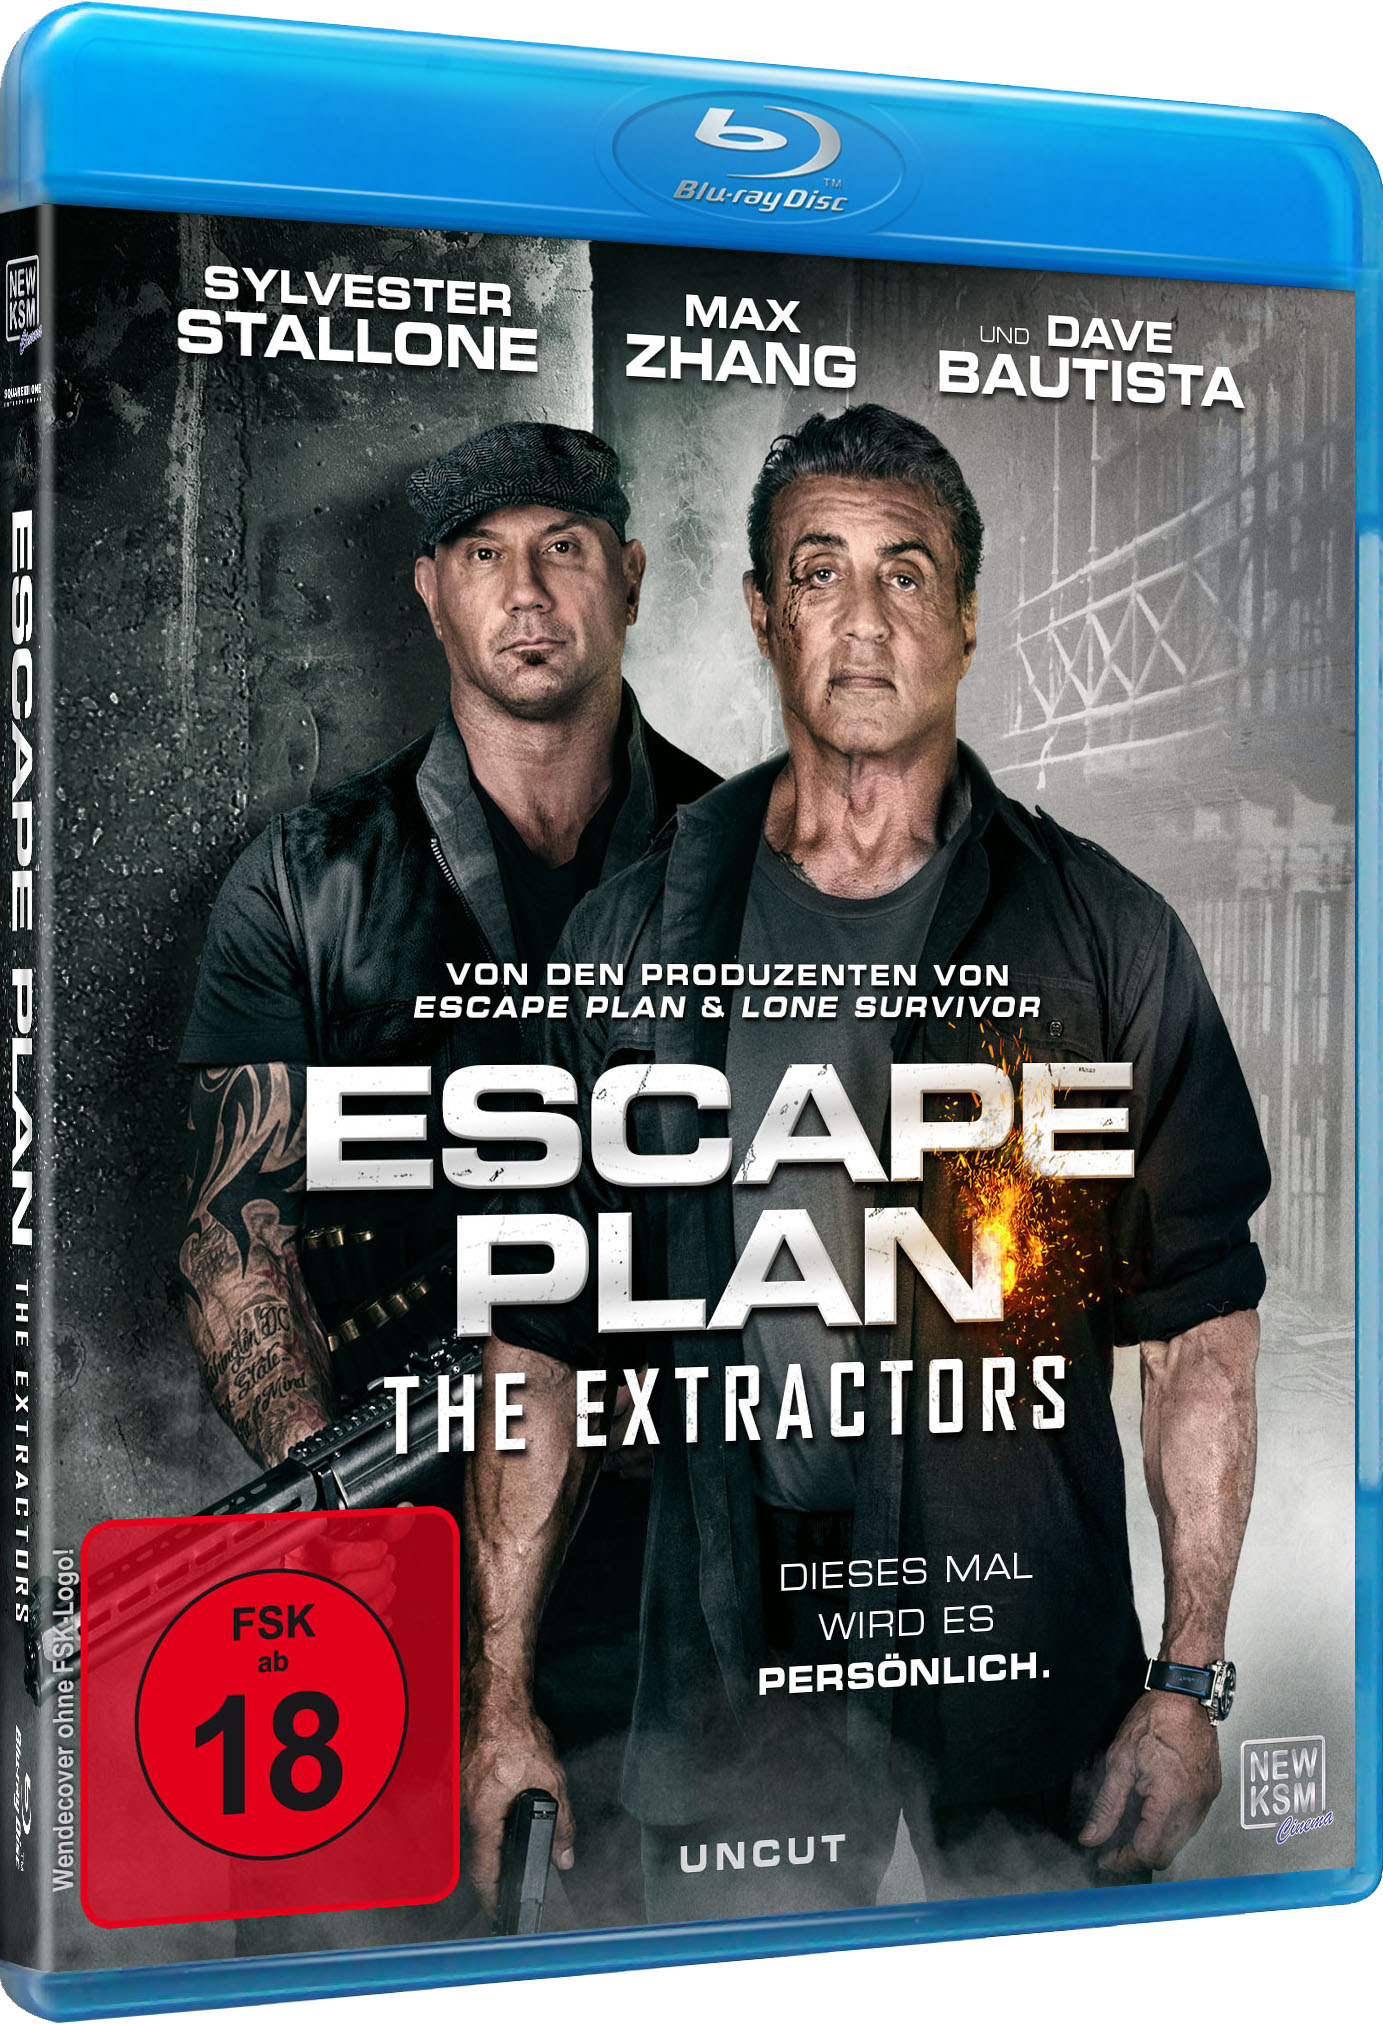 Escape Plan The Extractors (Blu-ray) Image 2